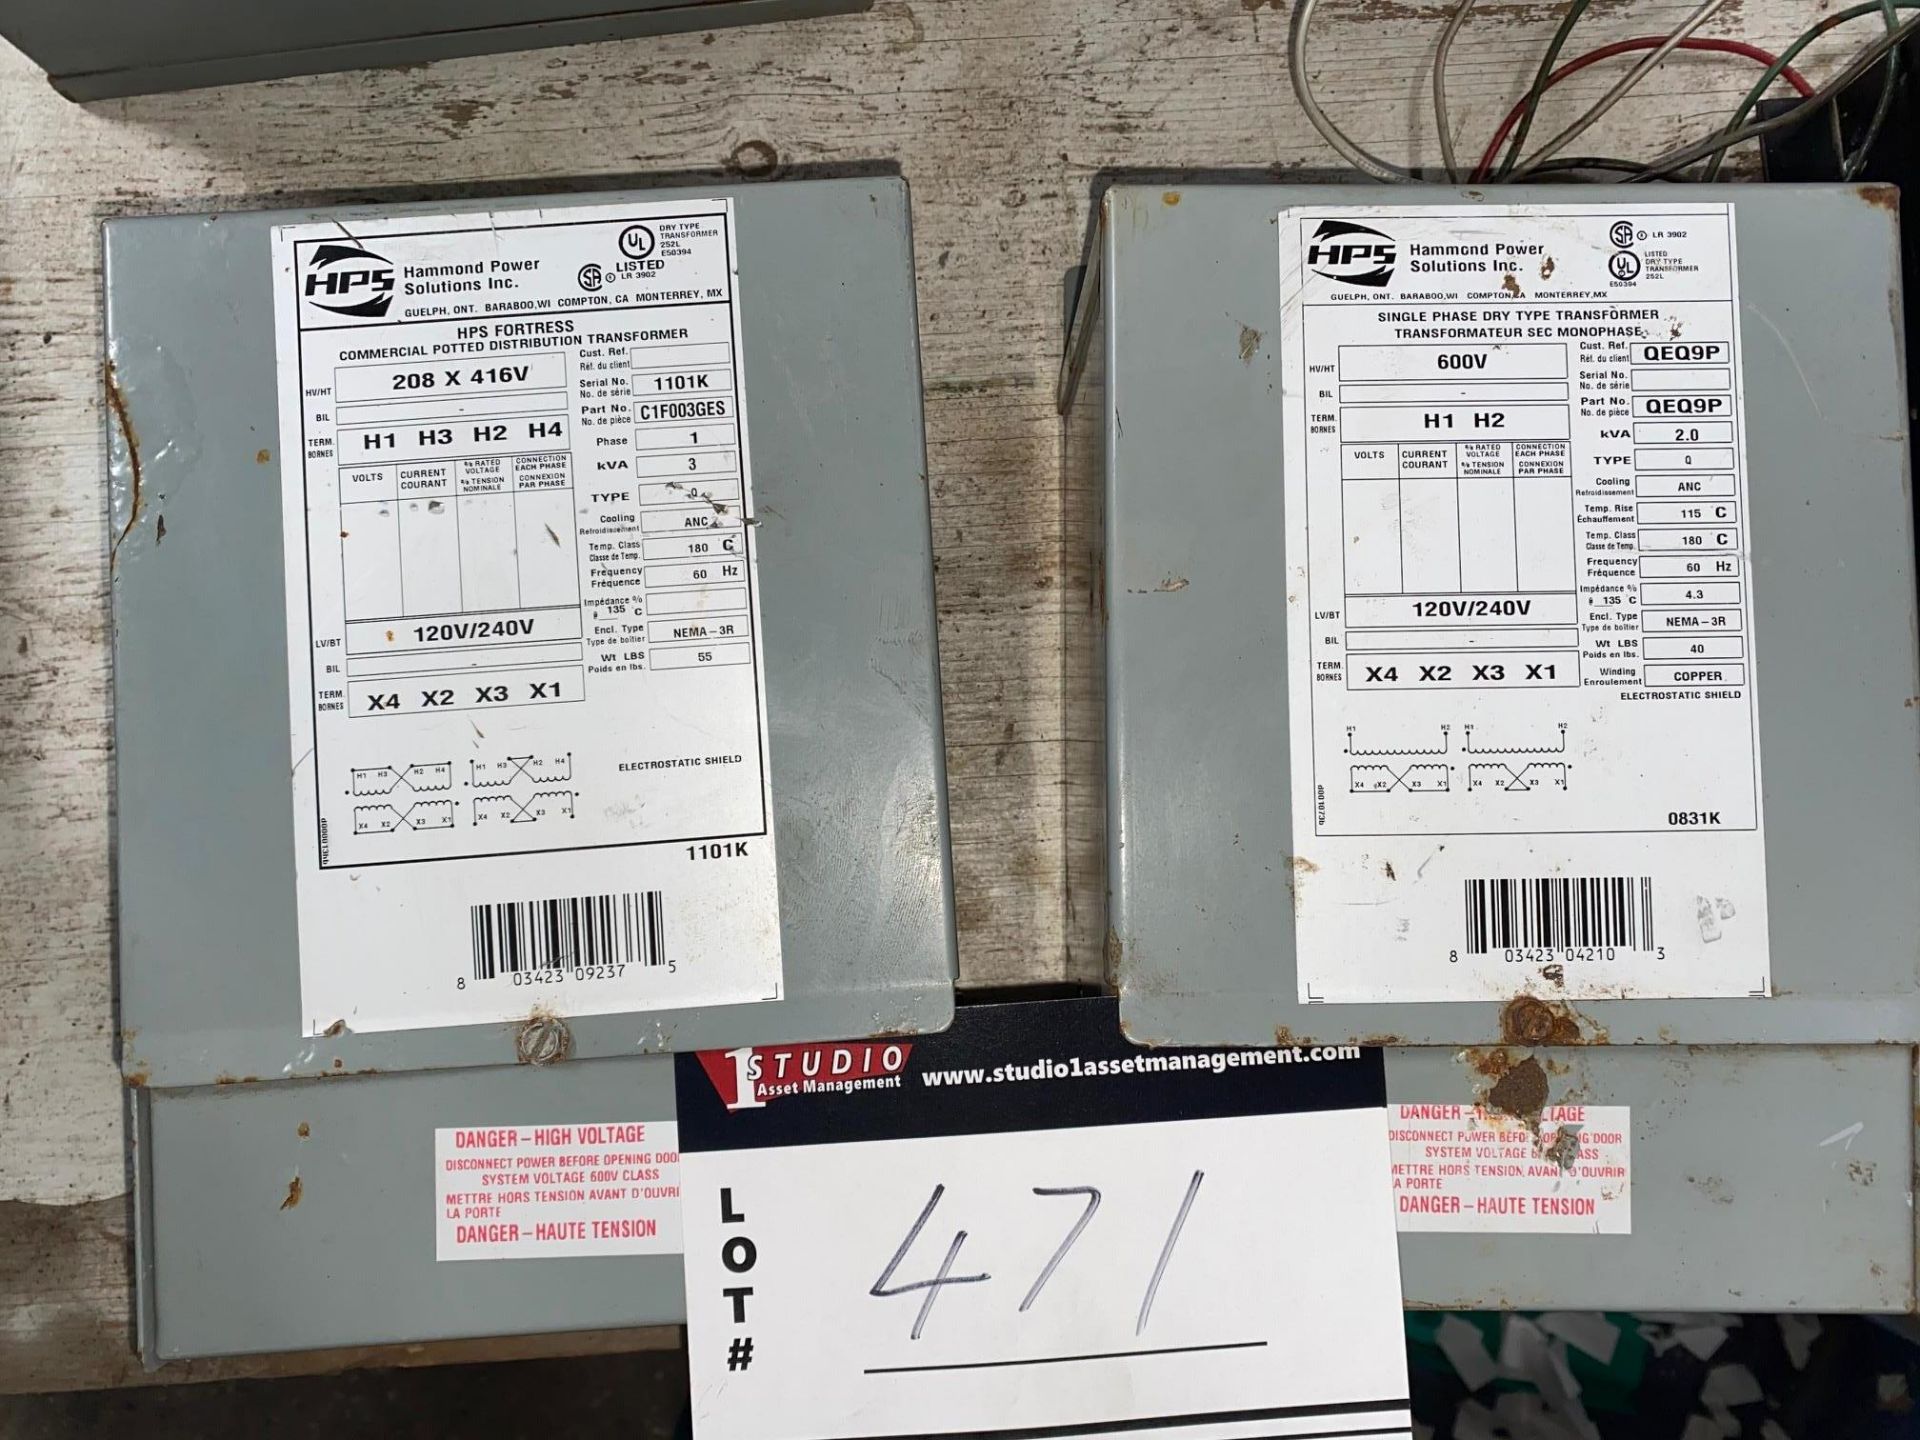 LOT OF 2 HAMMOND HPS FORTRESS COMMERCIAL PLOTTED DISTRIBUTION TRANSFORMERS